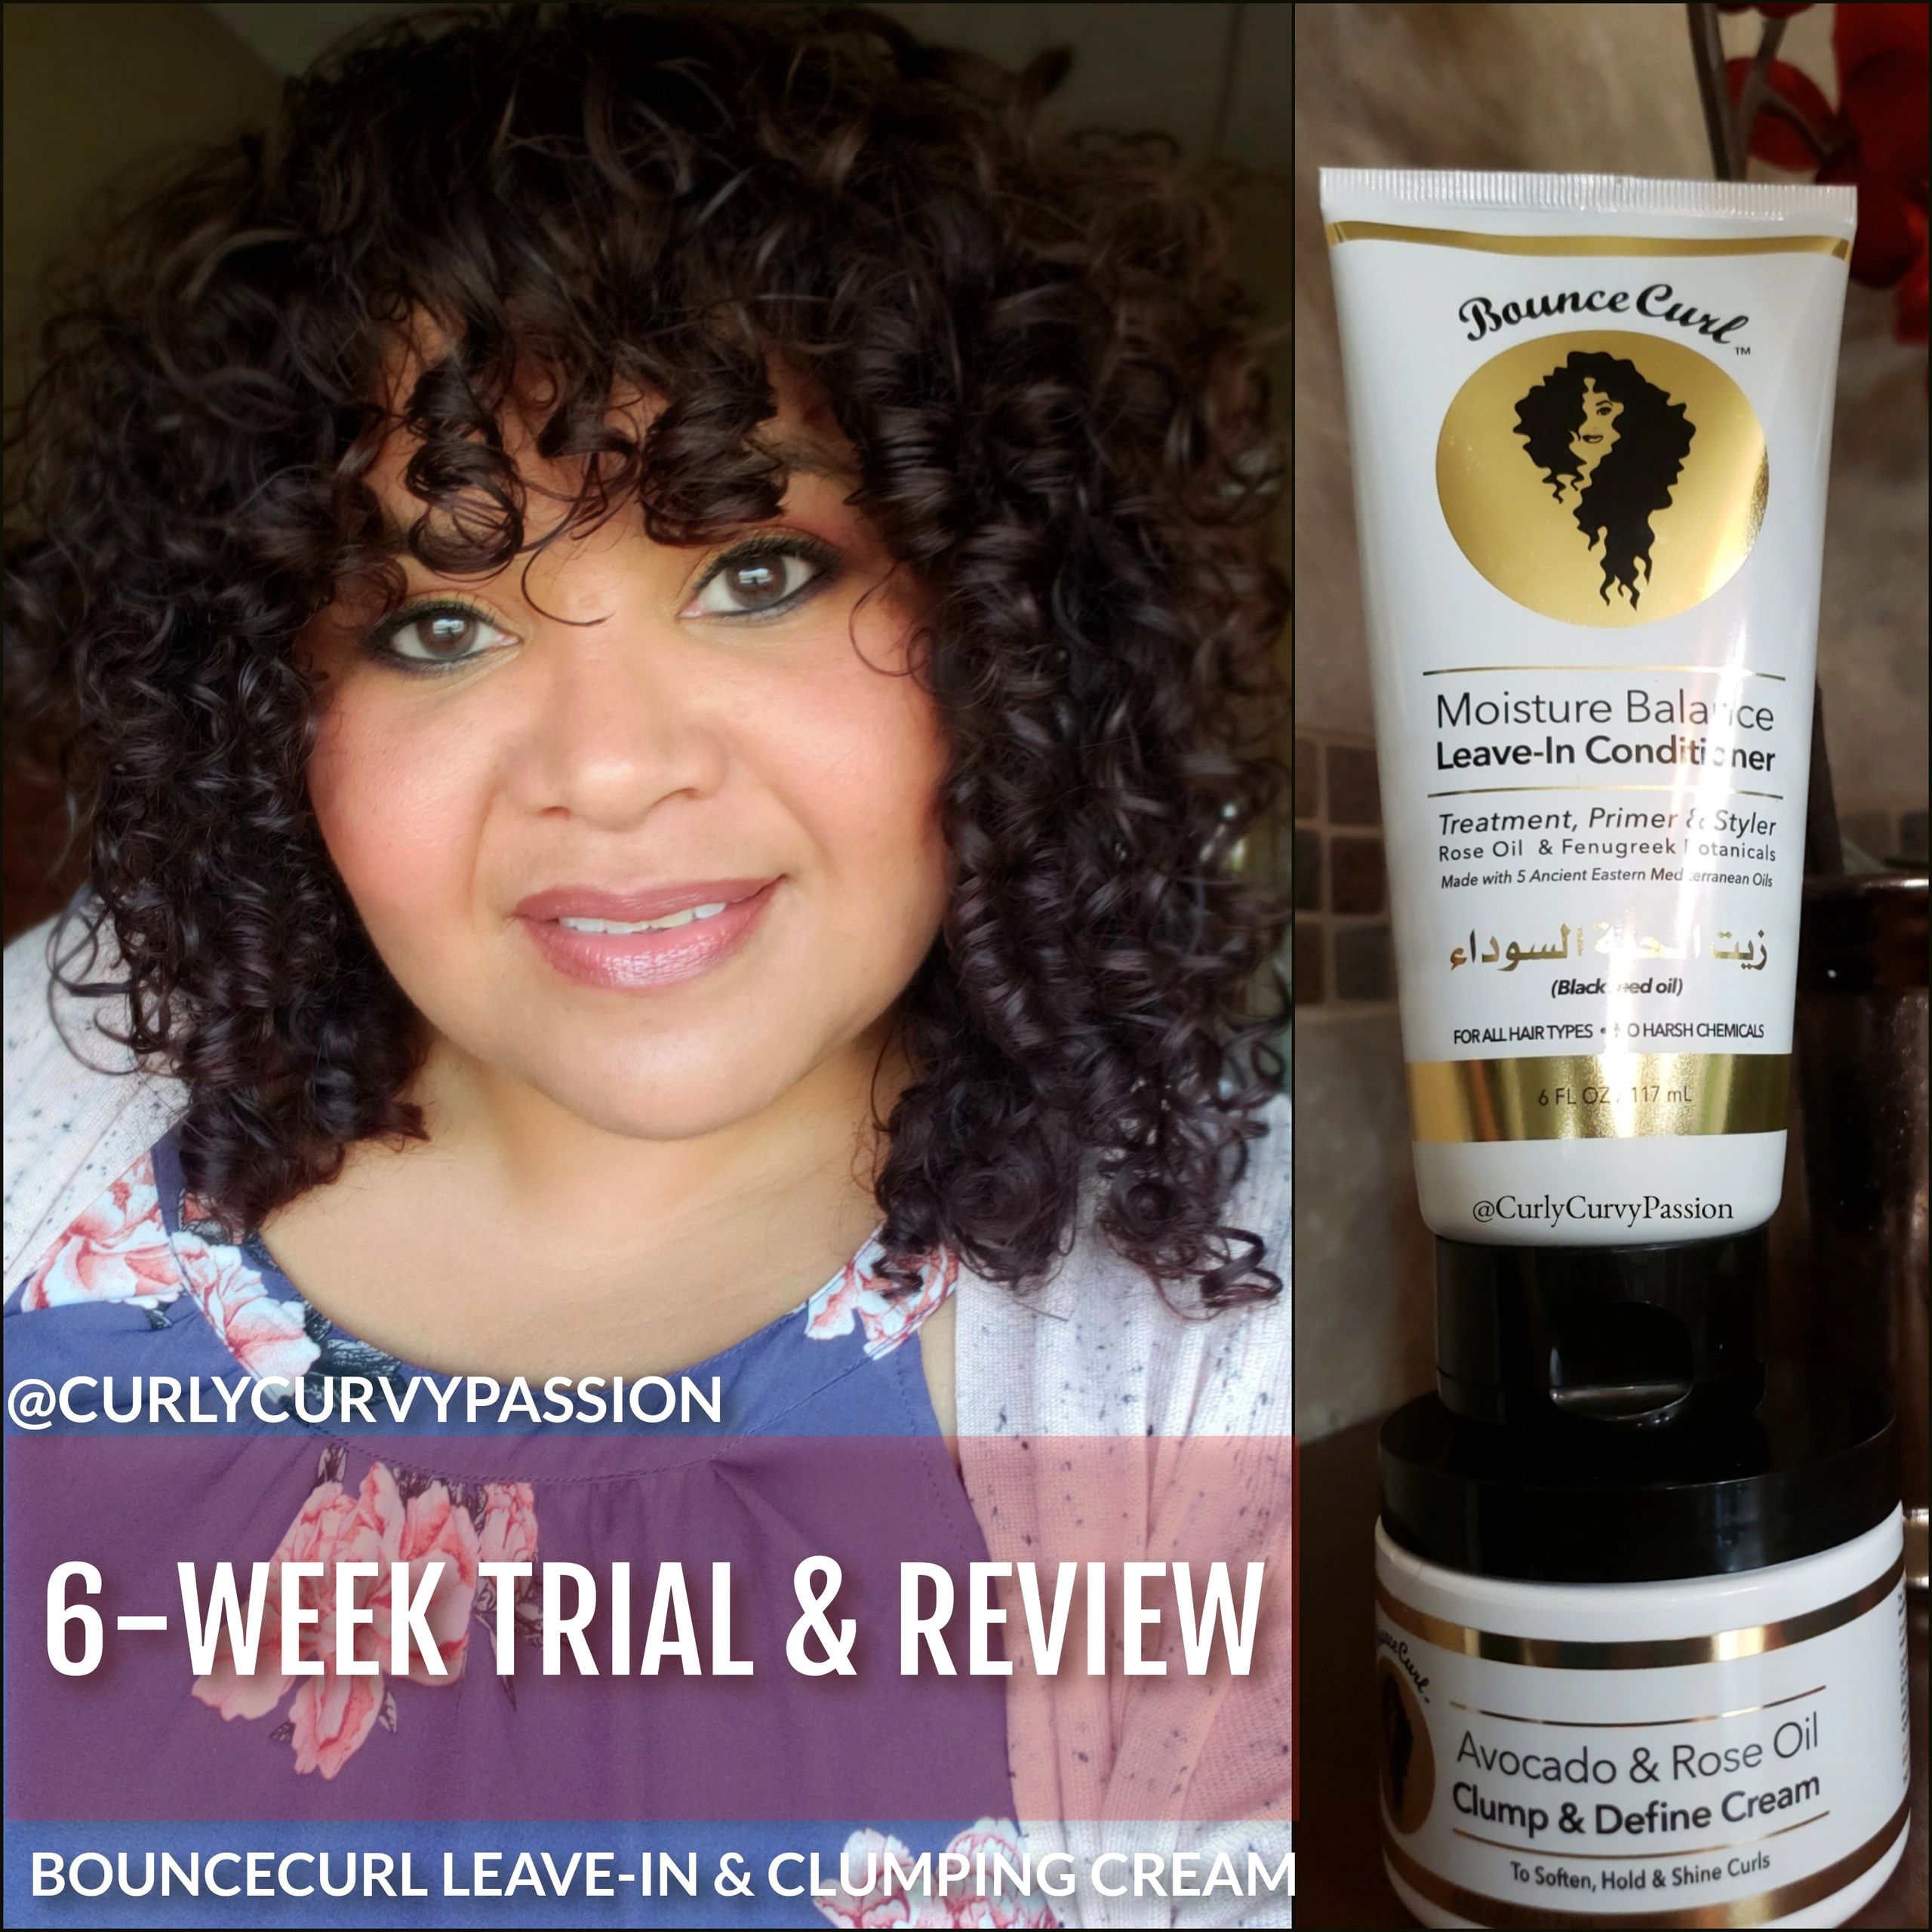 Bouncecurl's newest items: 6-week trial and review